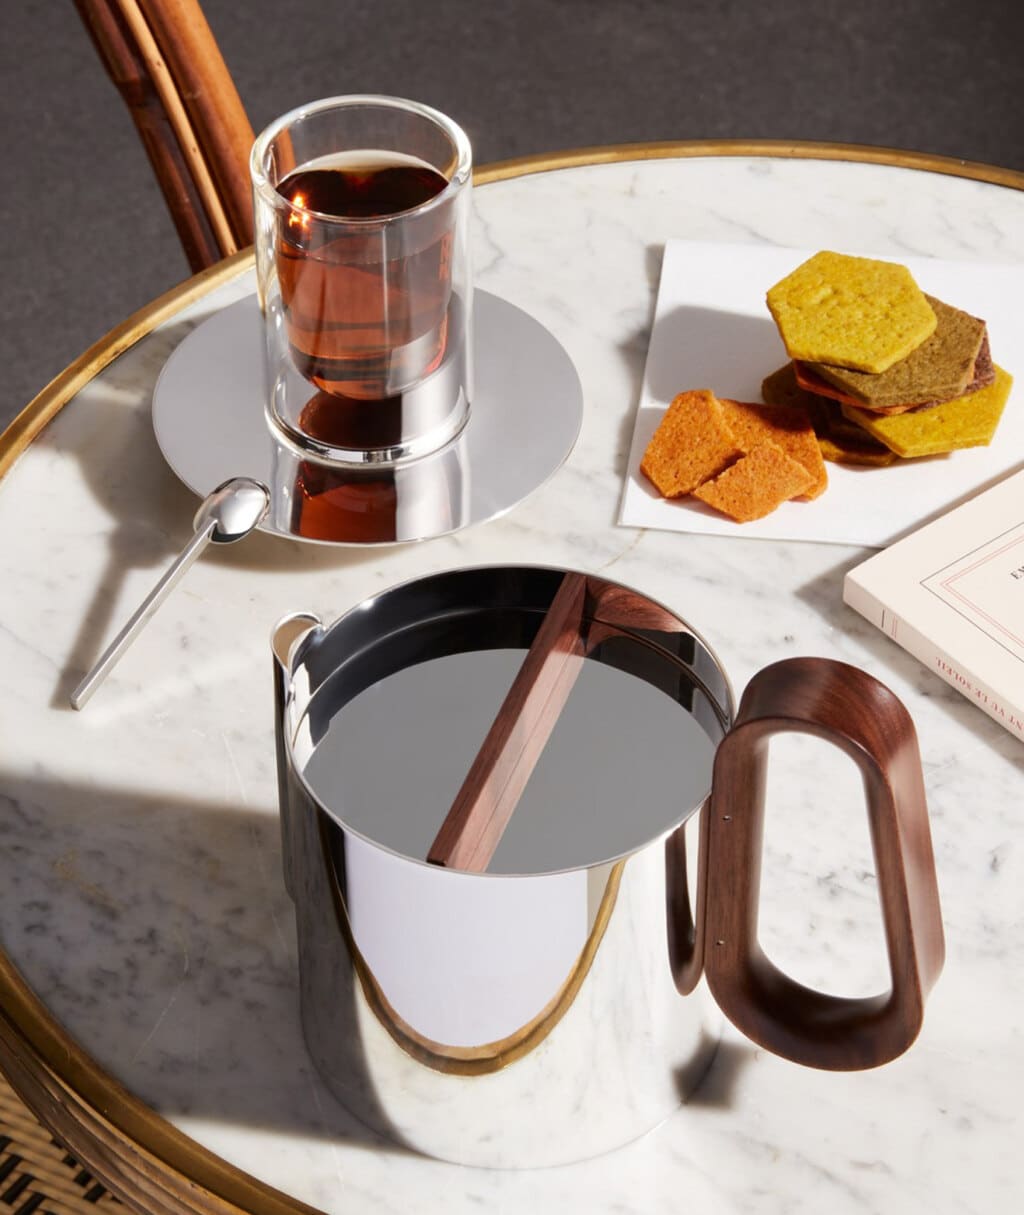 Tea pot and infusion cup and saucer photographed on a marble café table with some biscuits and a book